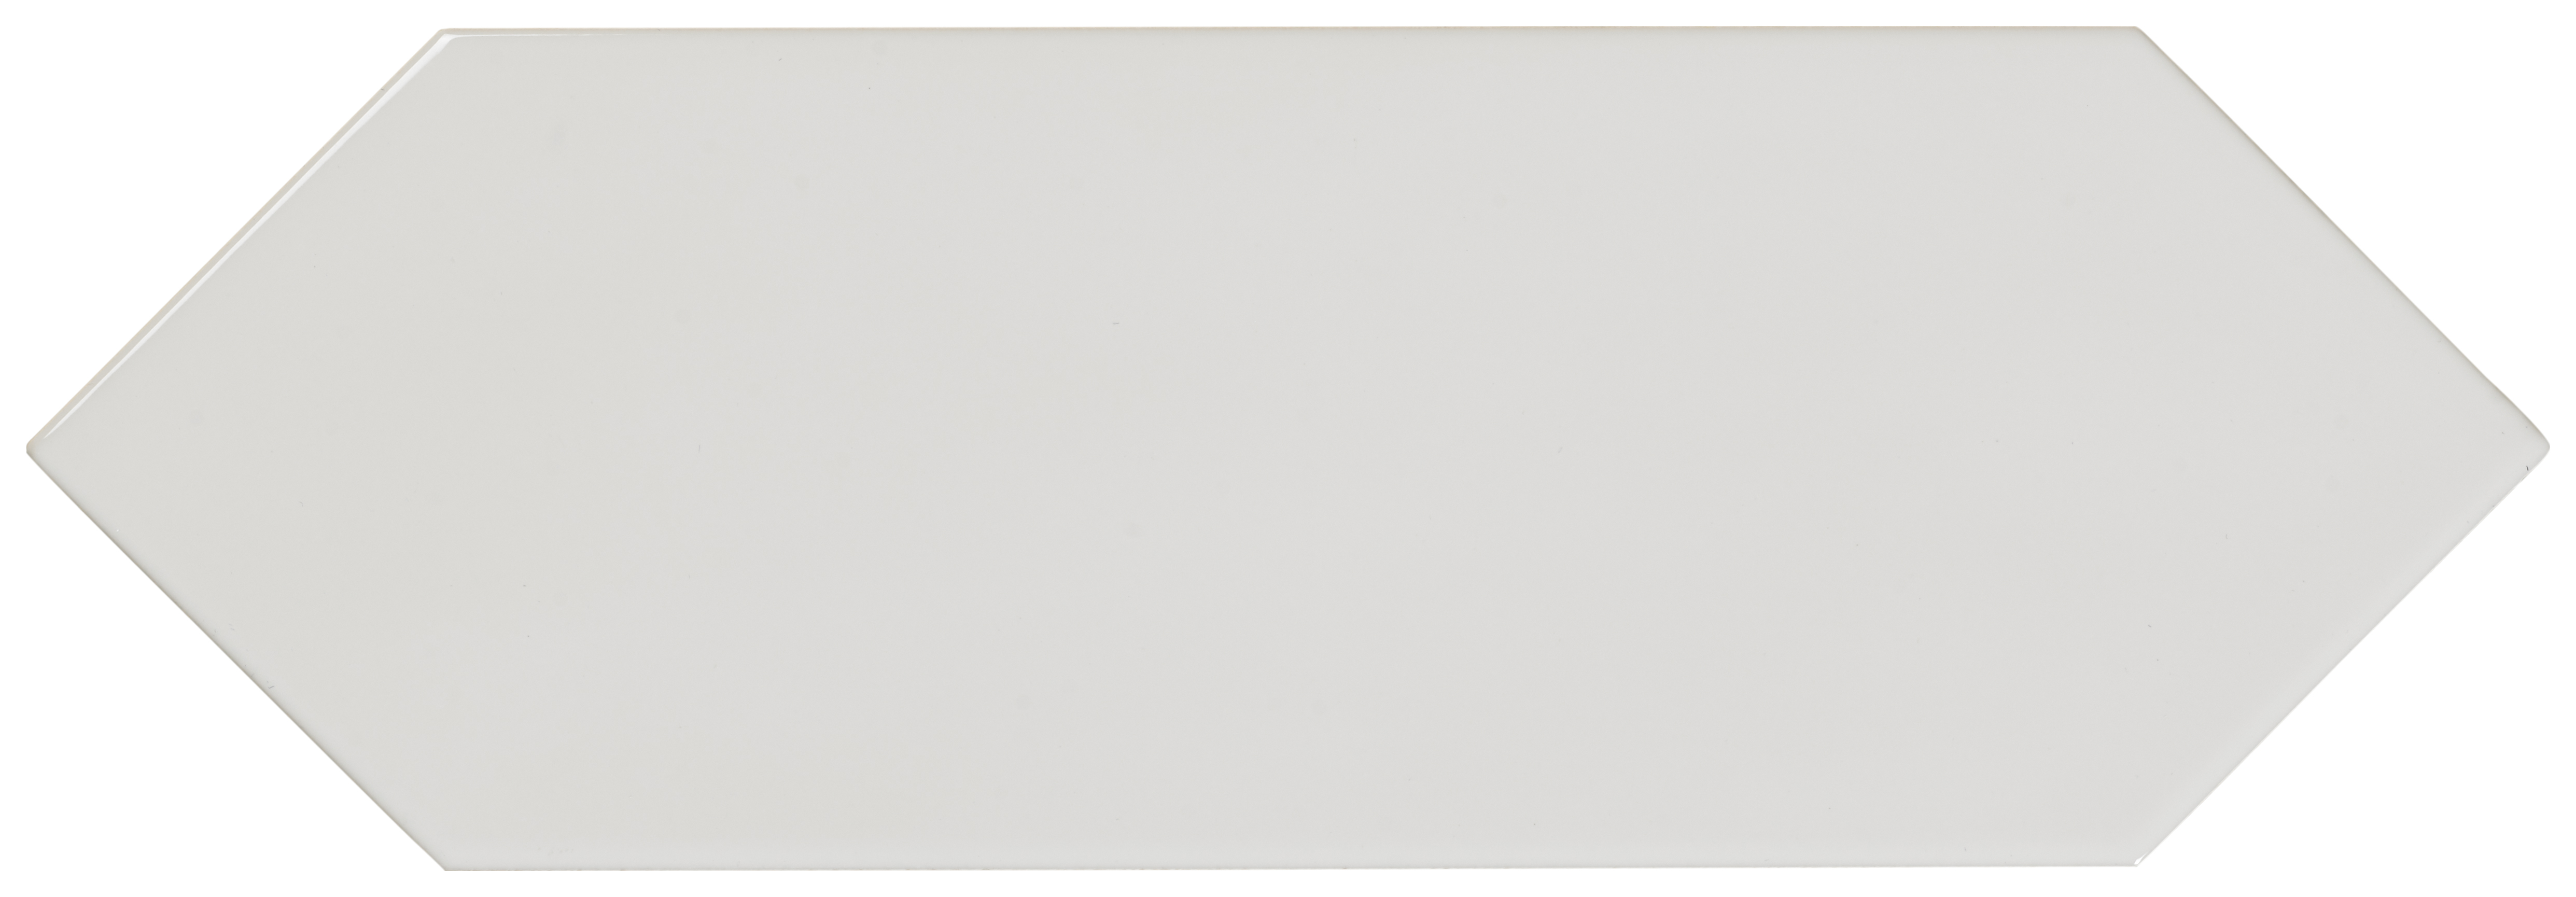 Wickes Boutique Clover White Gloss Ceramic Wall Tile - Cut Sample